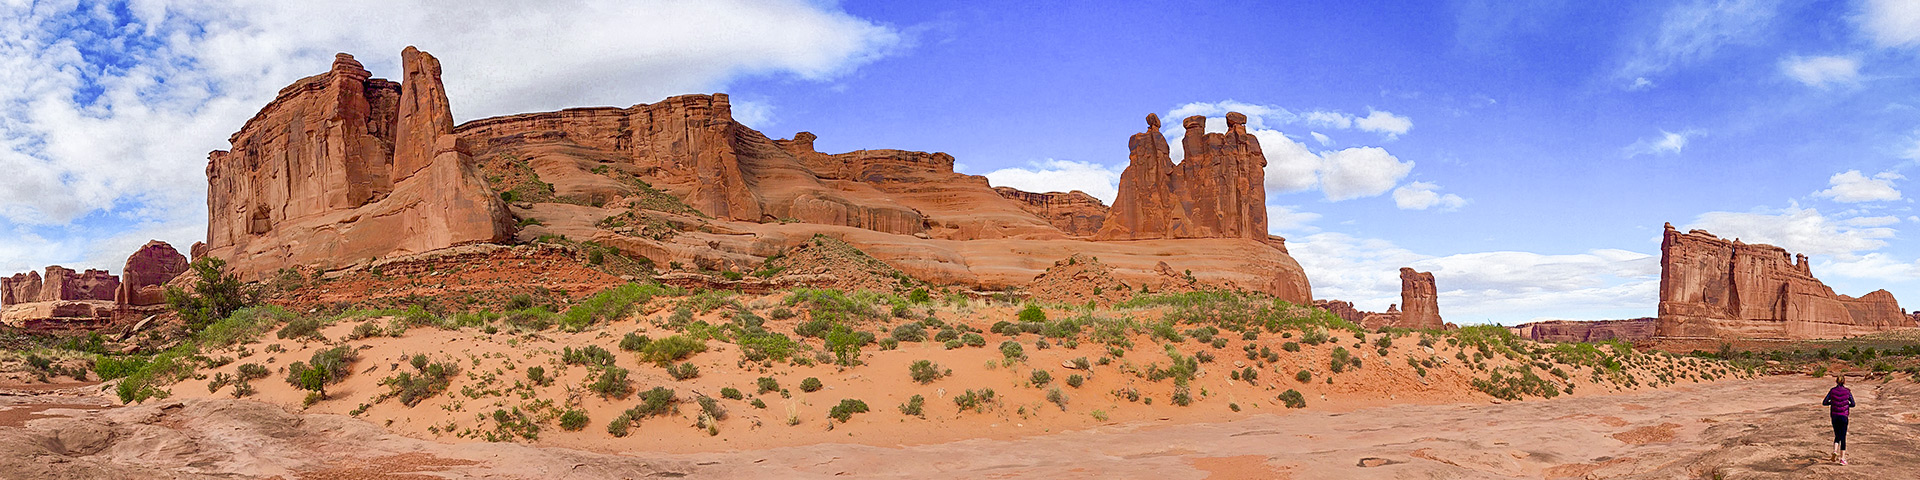 Arches National Park hikes